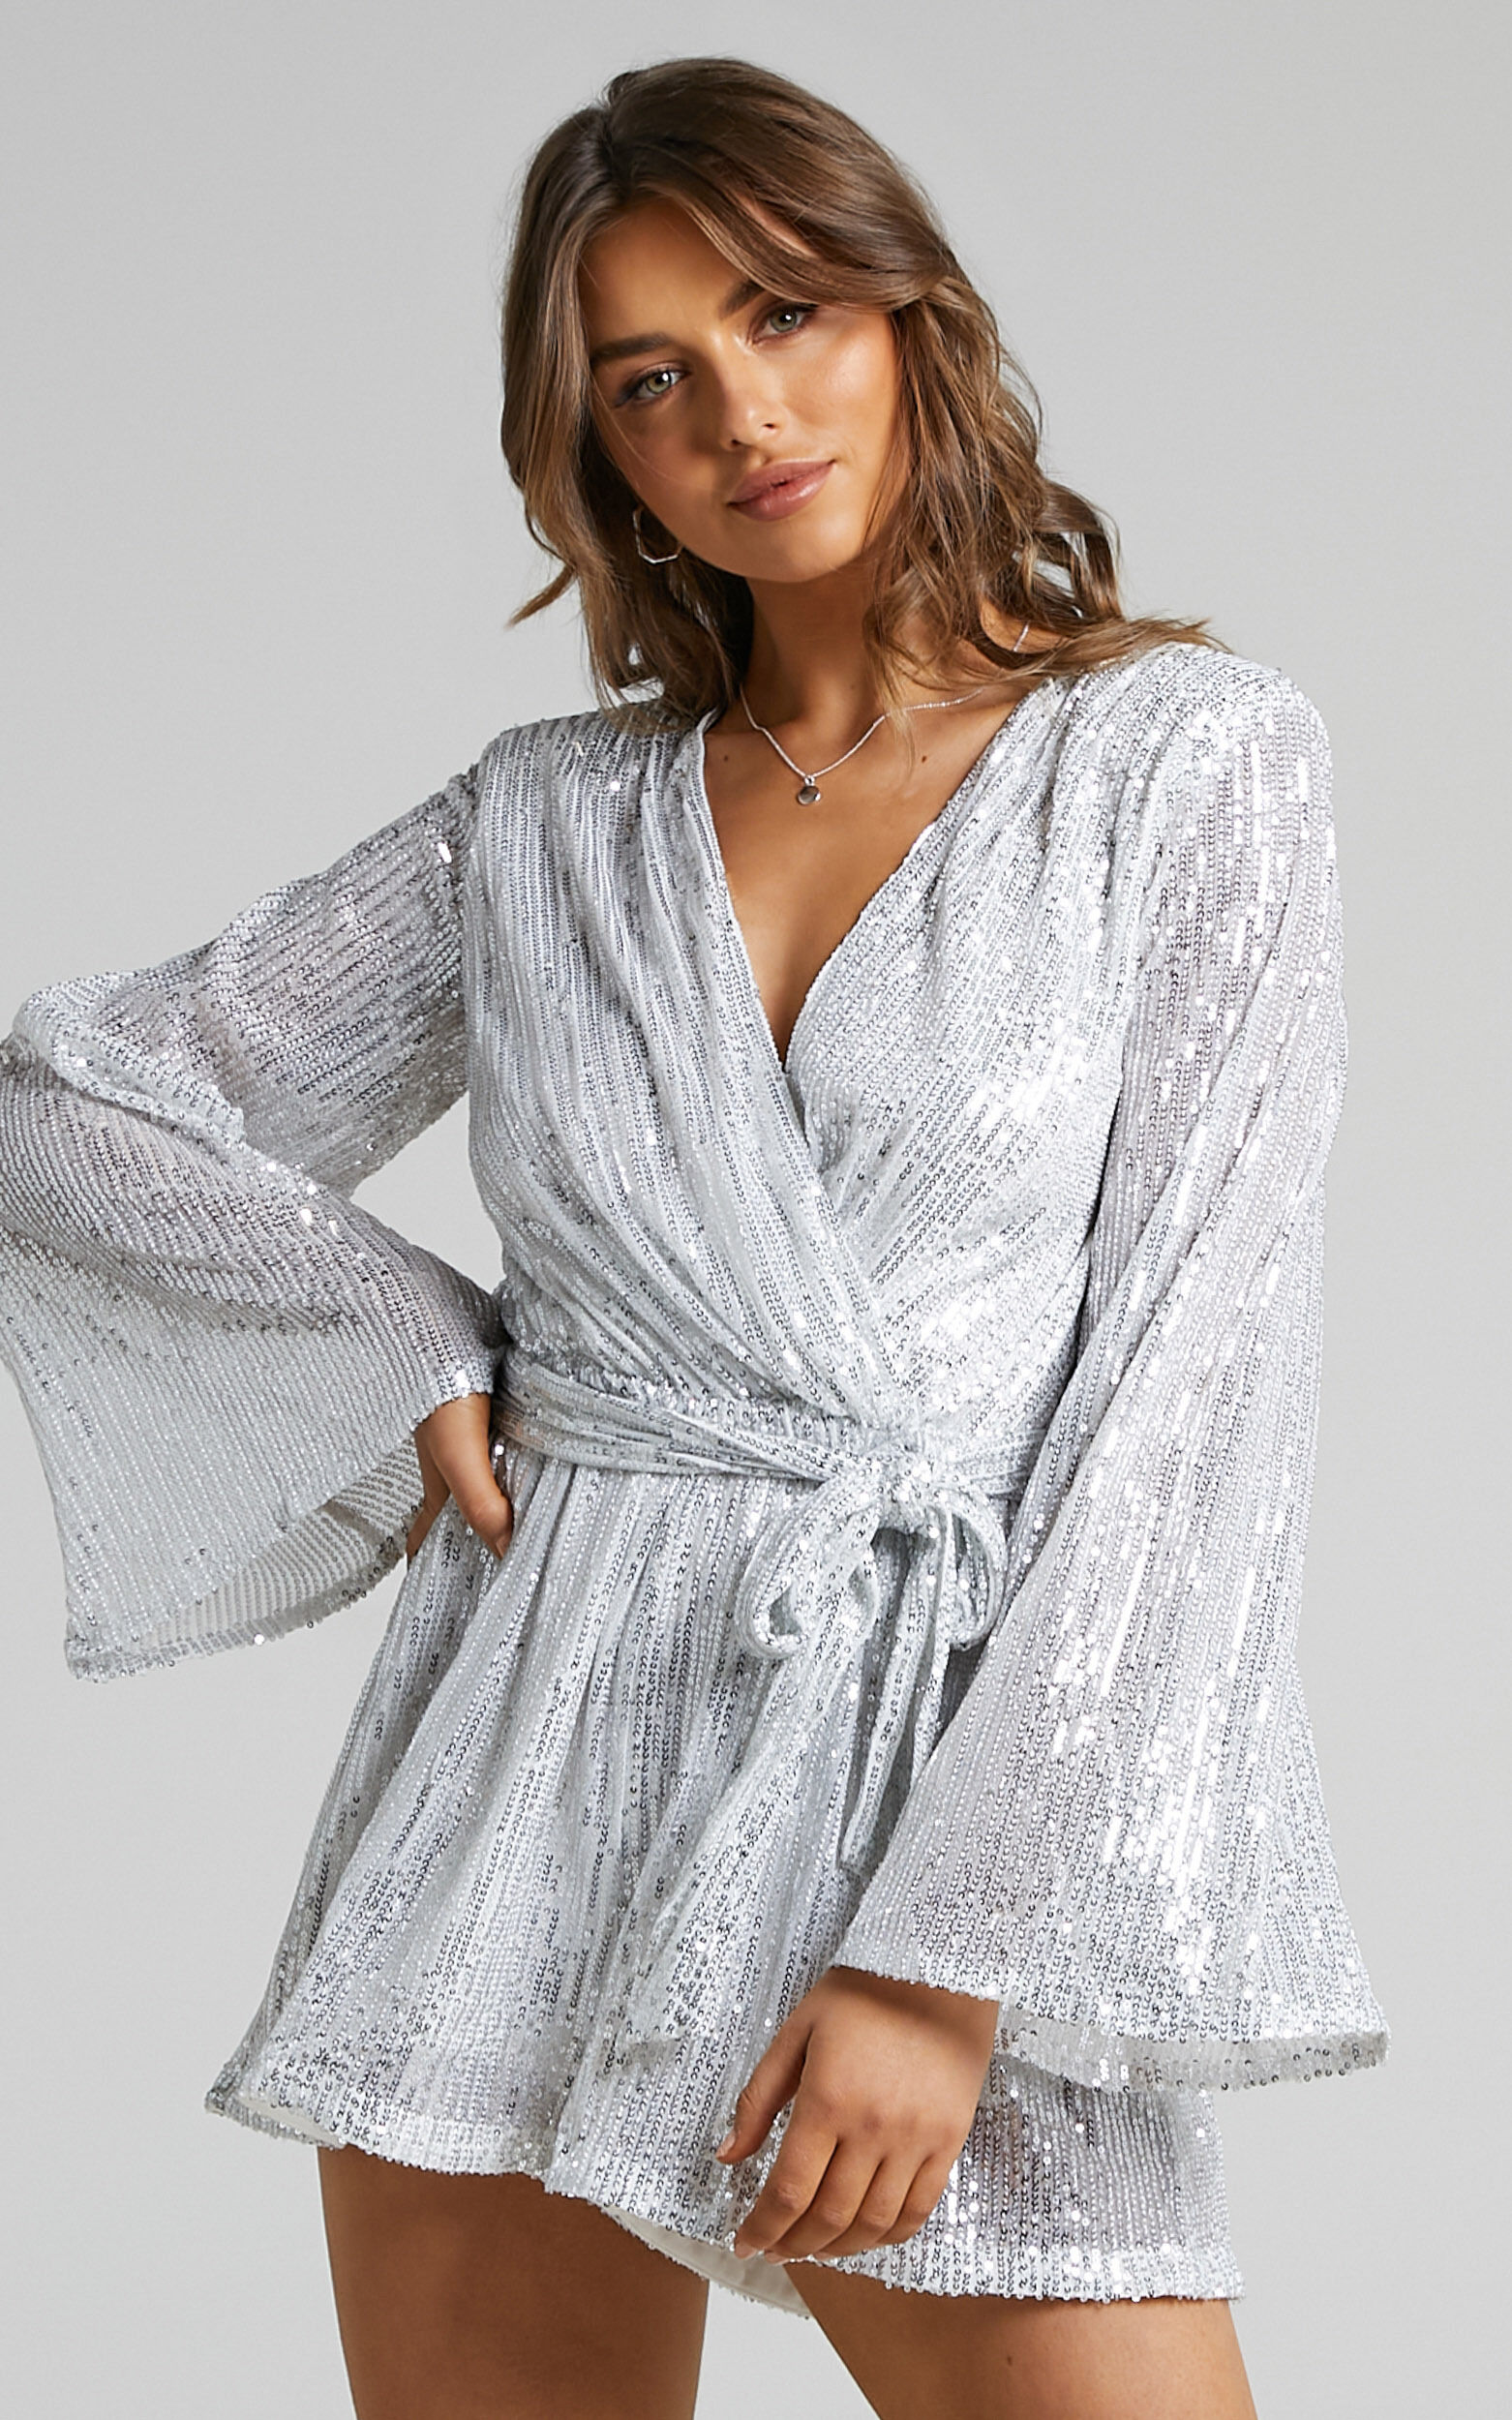 Lizzell Sequin Wrap Playsuit in Silver Sequin - 04, SLV2, super-hi-res image number null